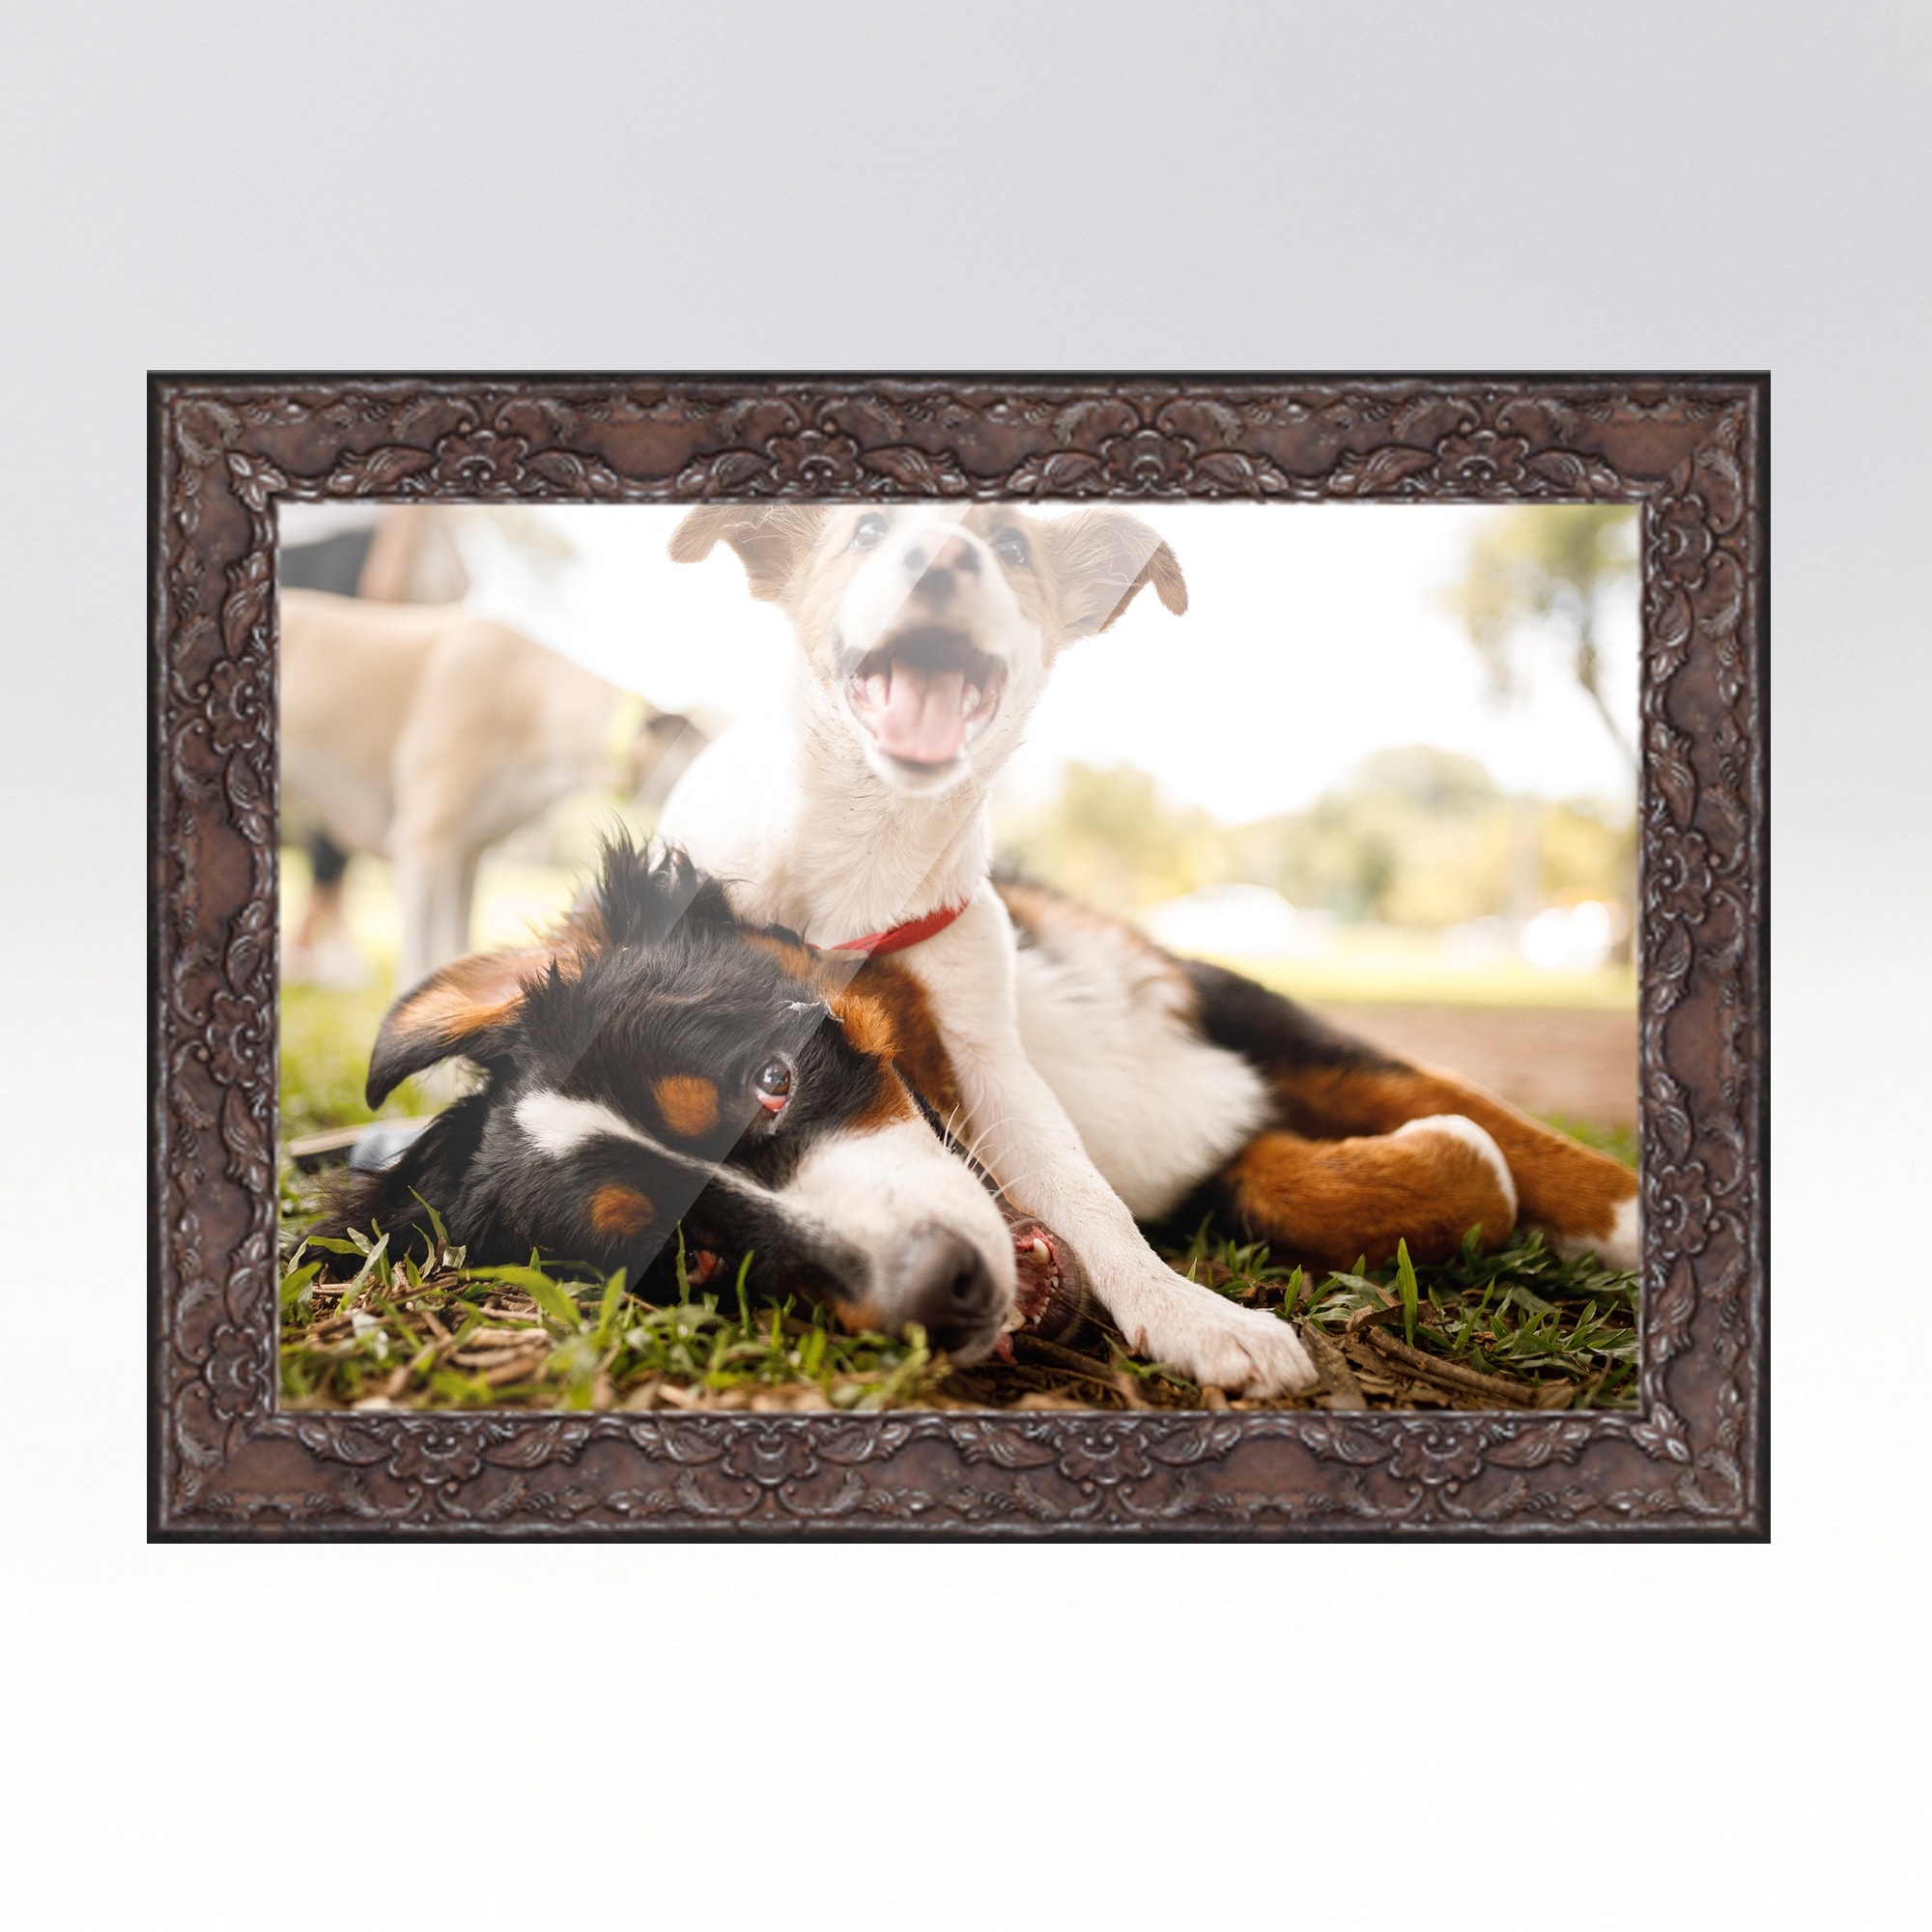 Barcelona Pewter Photo Frame 11x14, Matted to 8x10' 13 x 16-inch - Bed Bath  & Beyond - 10089974